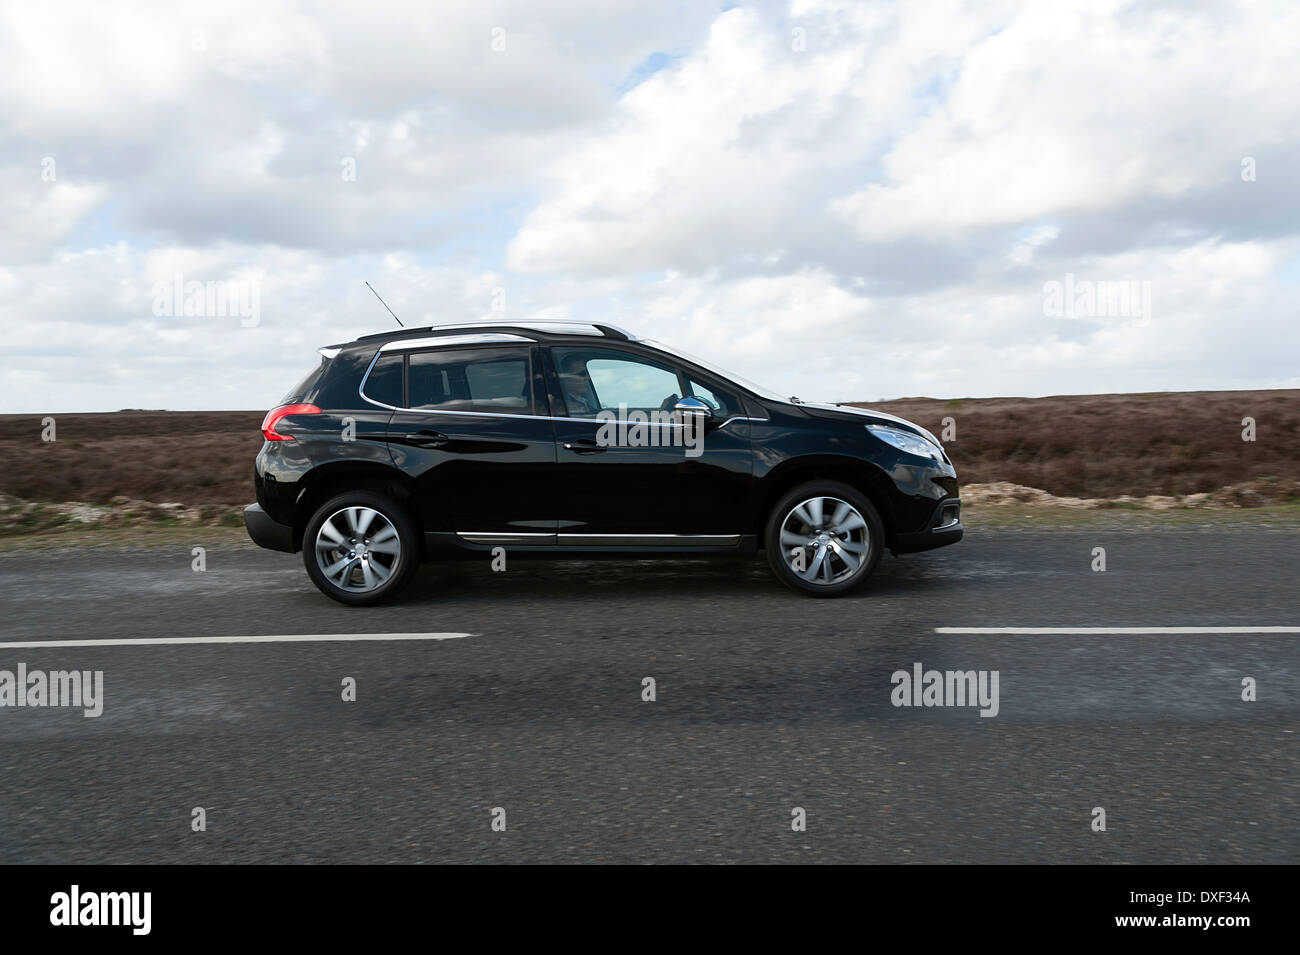 2014 Peugeot 2008 HDi Feline driving on country road Stock Photo